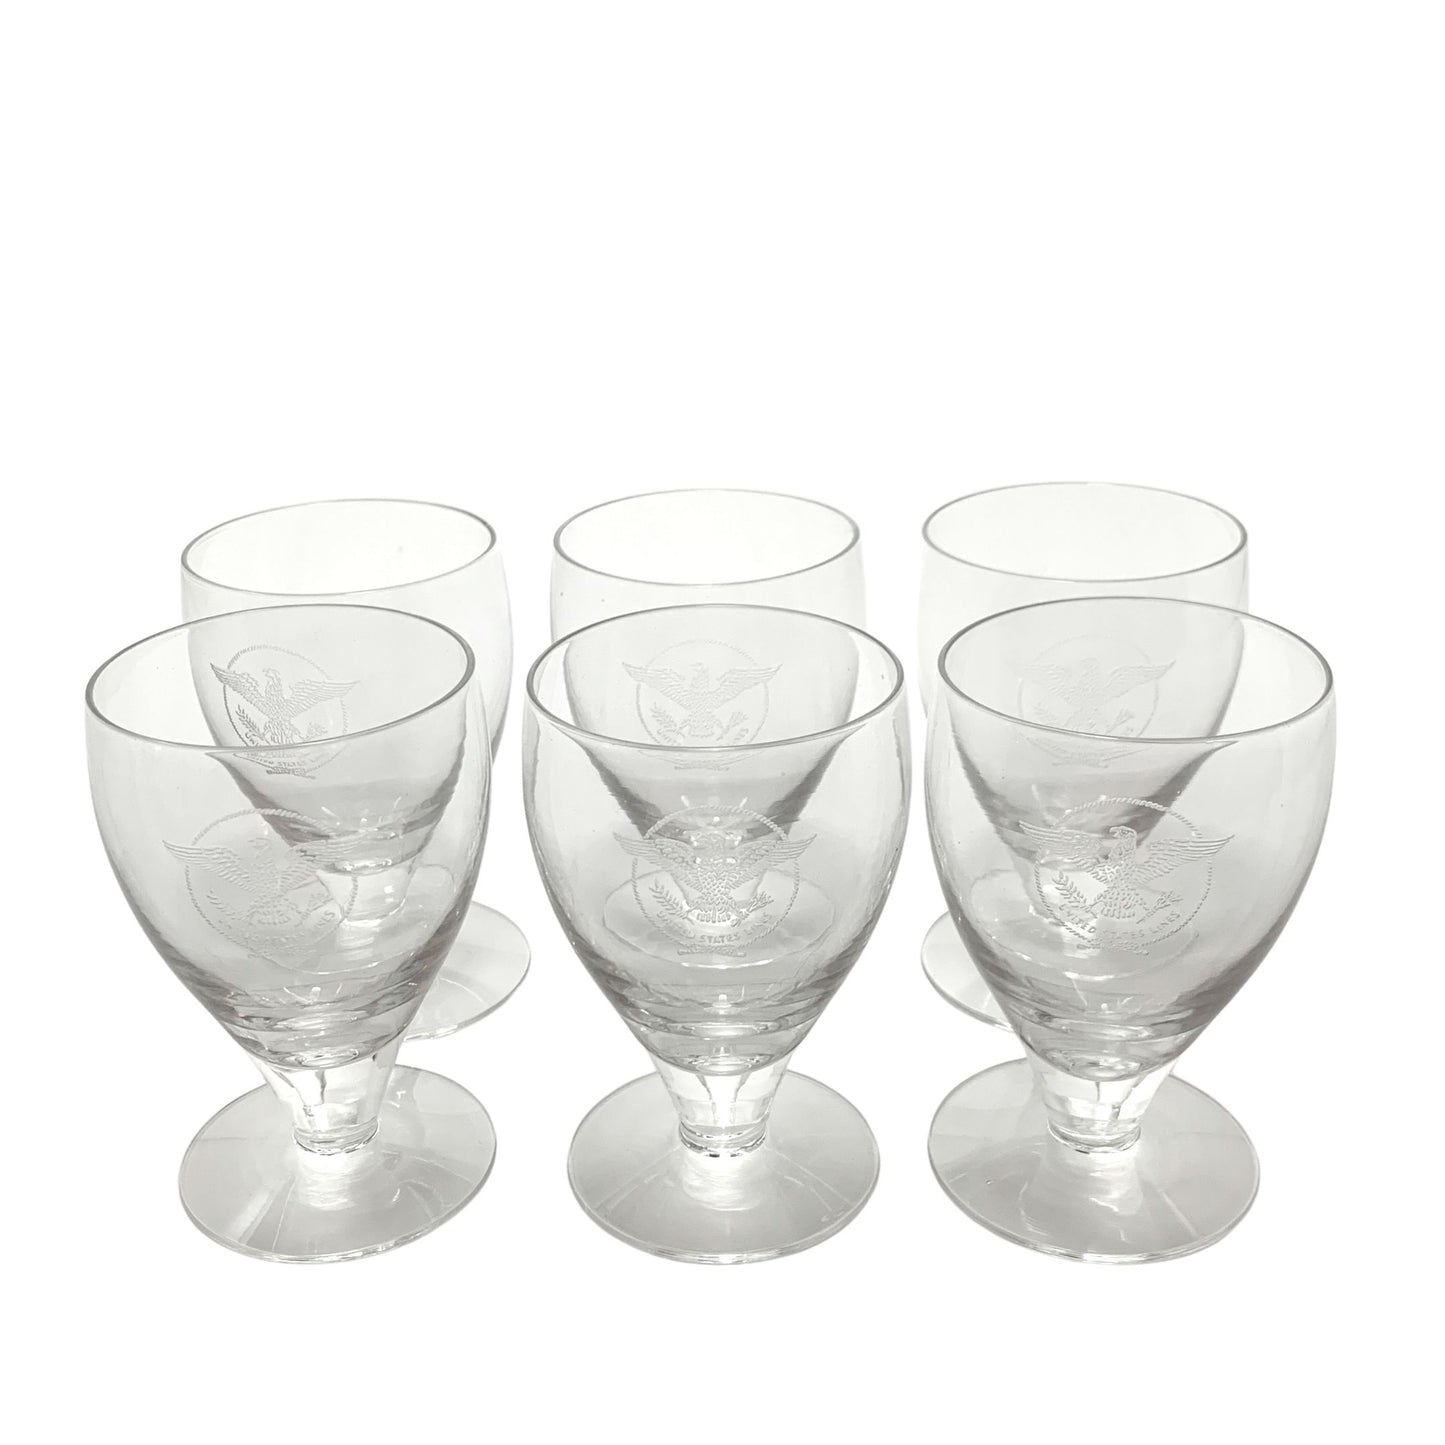 SS United States Crystal Wine Glasses (6)